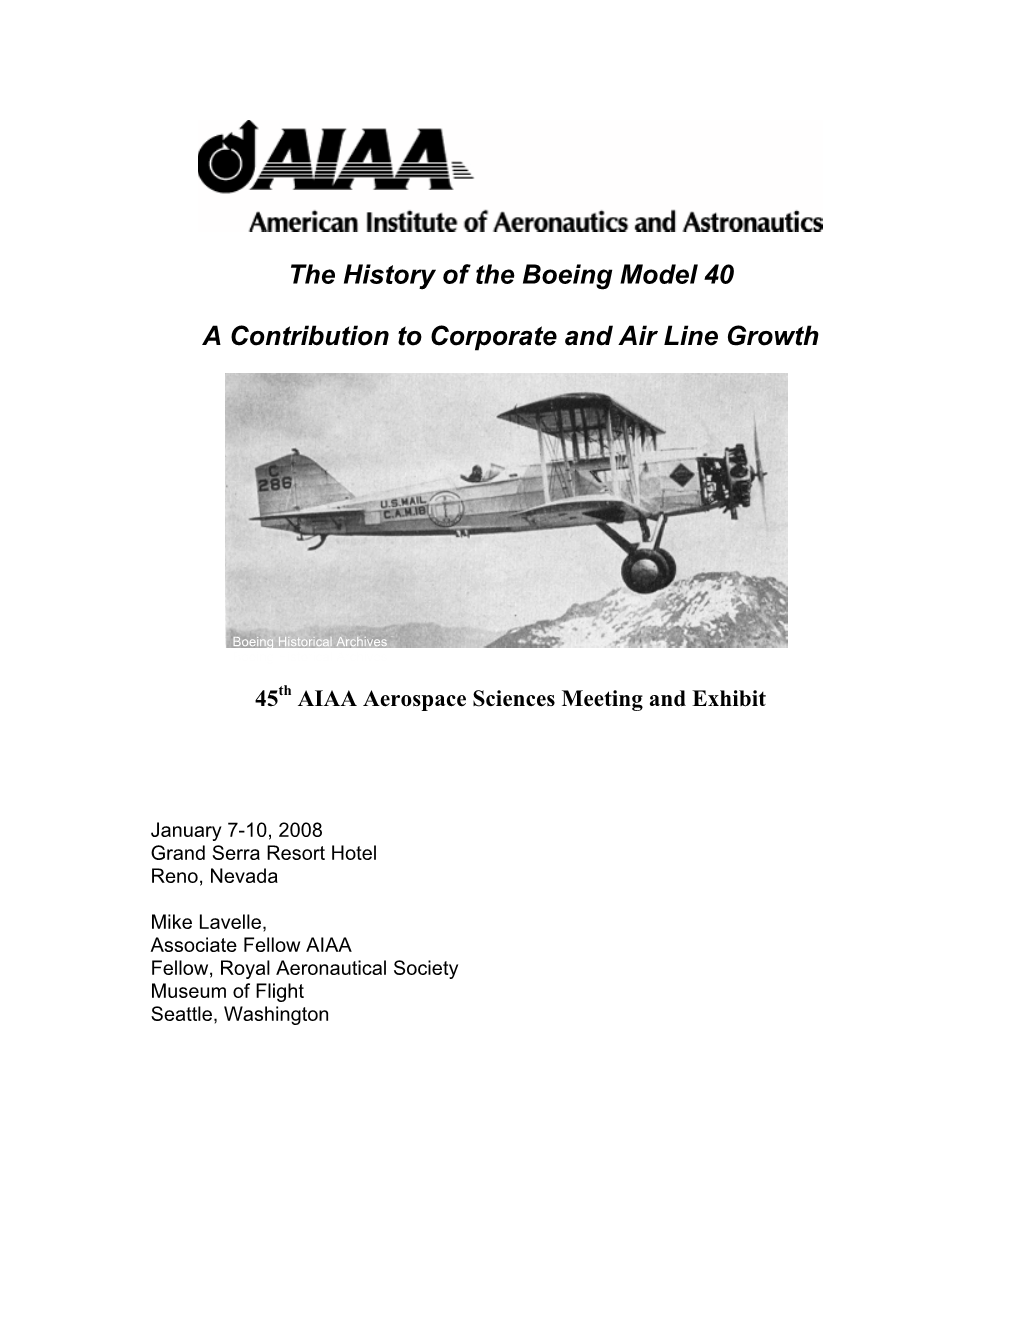 The History of the Boeing Model 40 a Contribution to Corporate and Air Line Growth